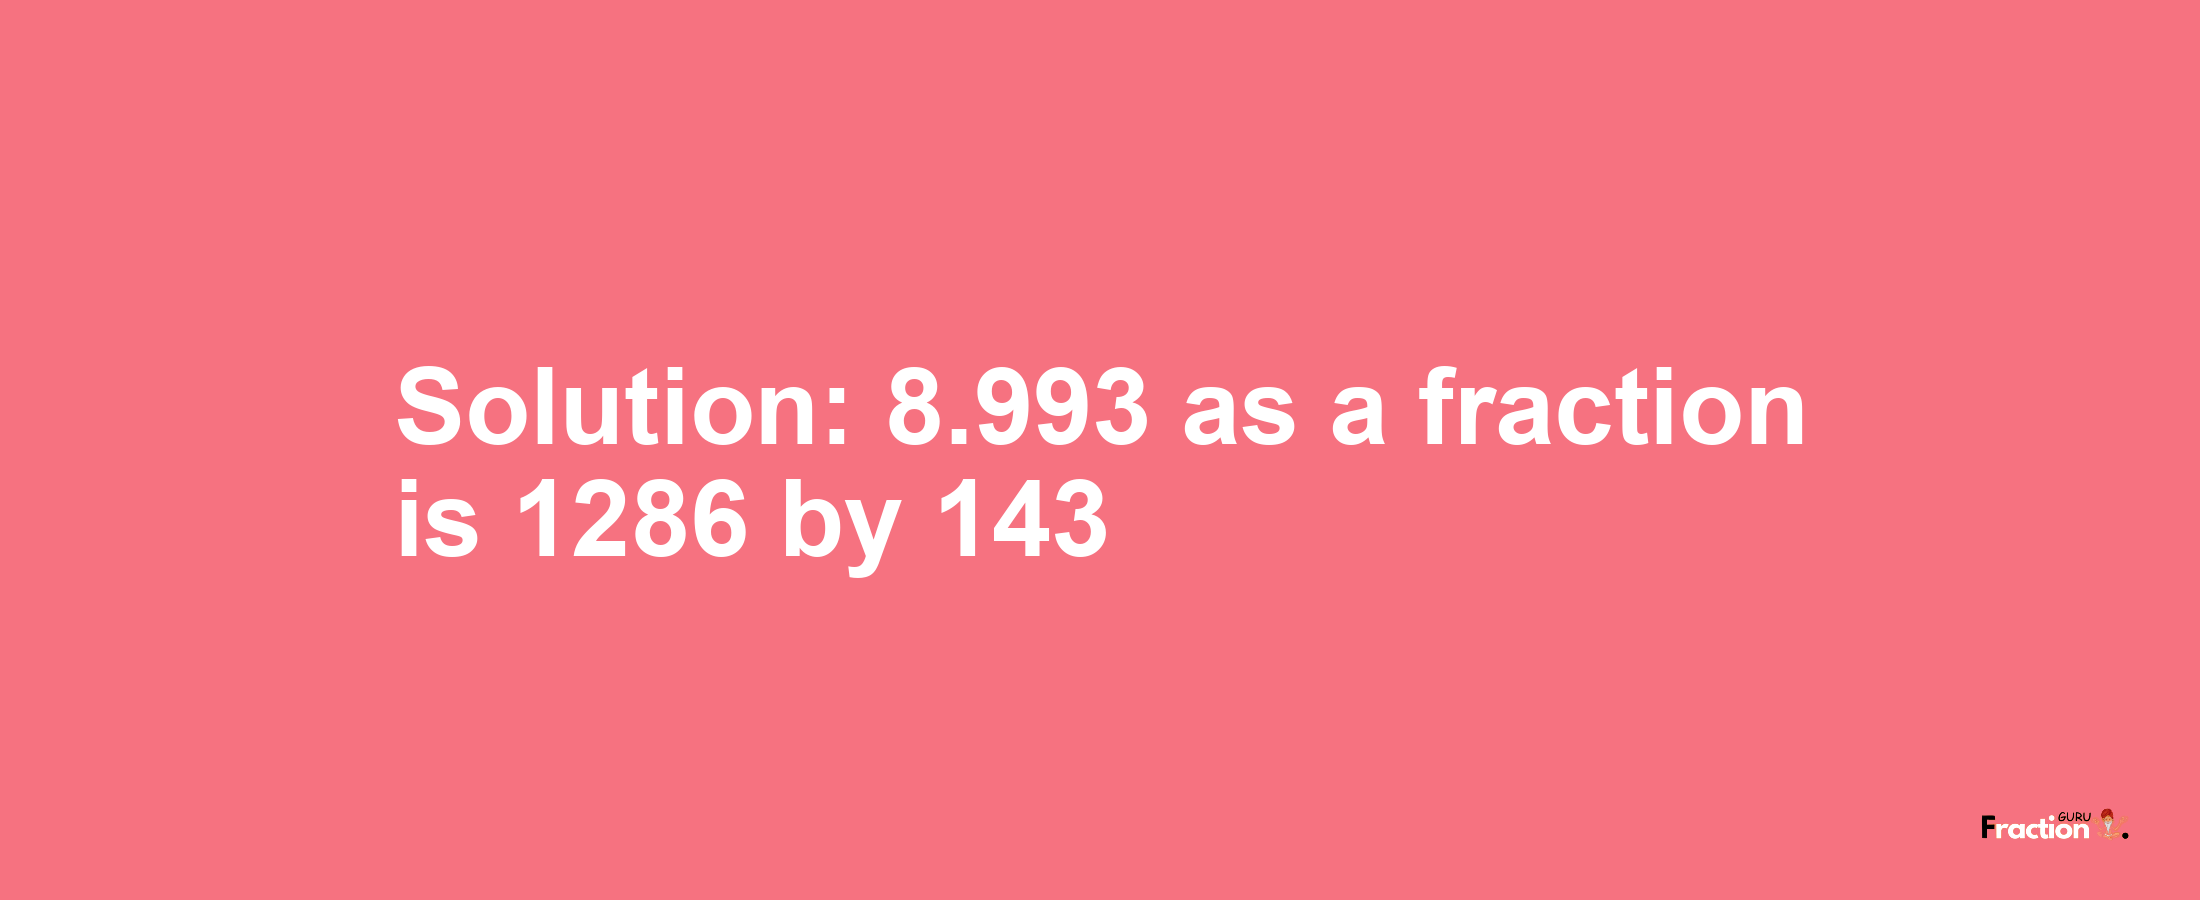 Solution:8.993 as a fraction is 1286/143